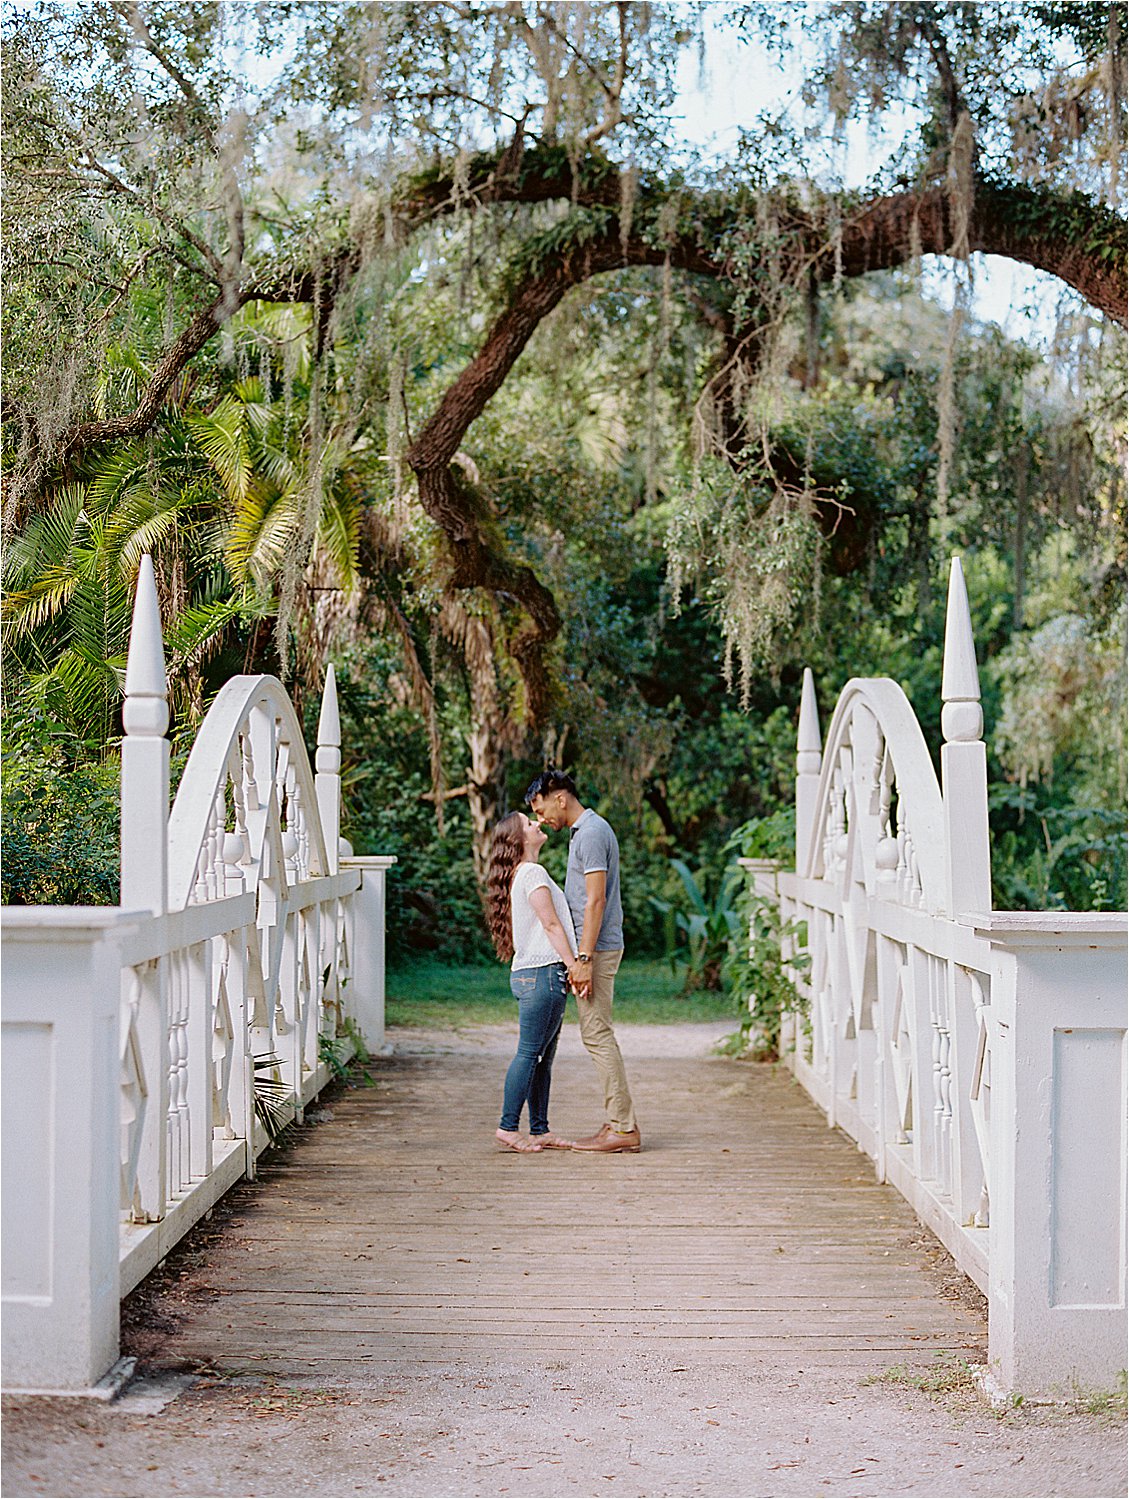 Summer Engagement Session inFt. Myers, Florida with South Florida Film Wedding Photographer, Renee Hollingshead